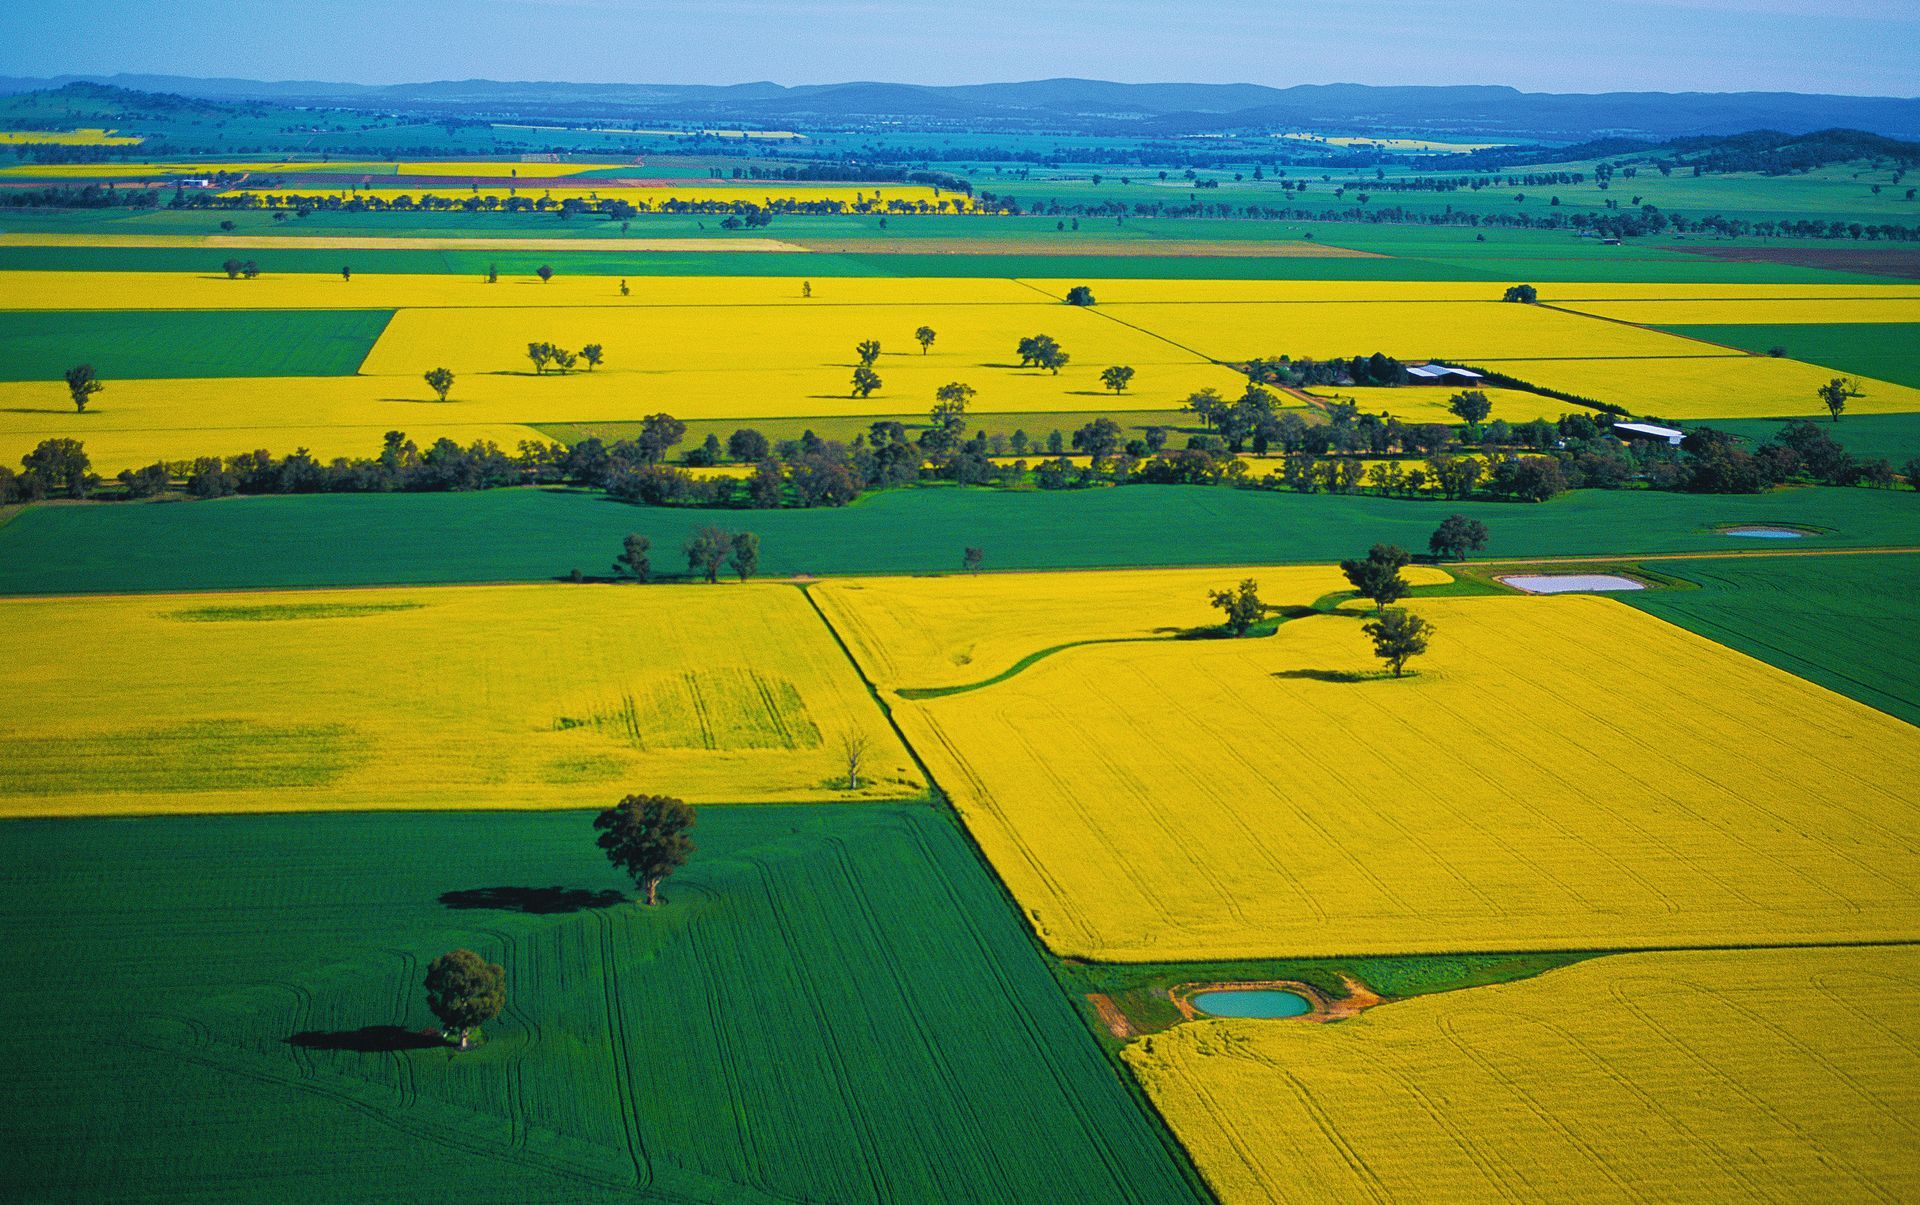 A view from the air of a large canola field in central western N.S.W. Australia